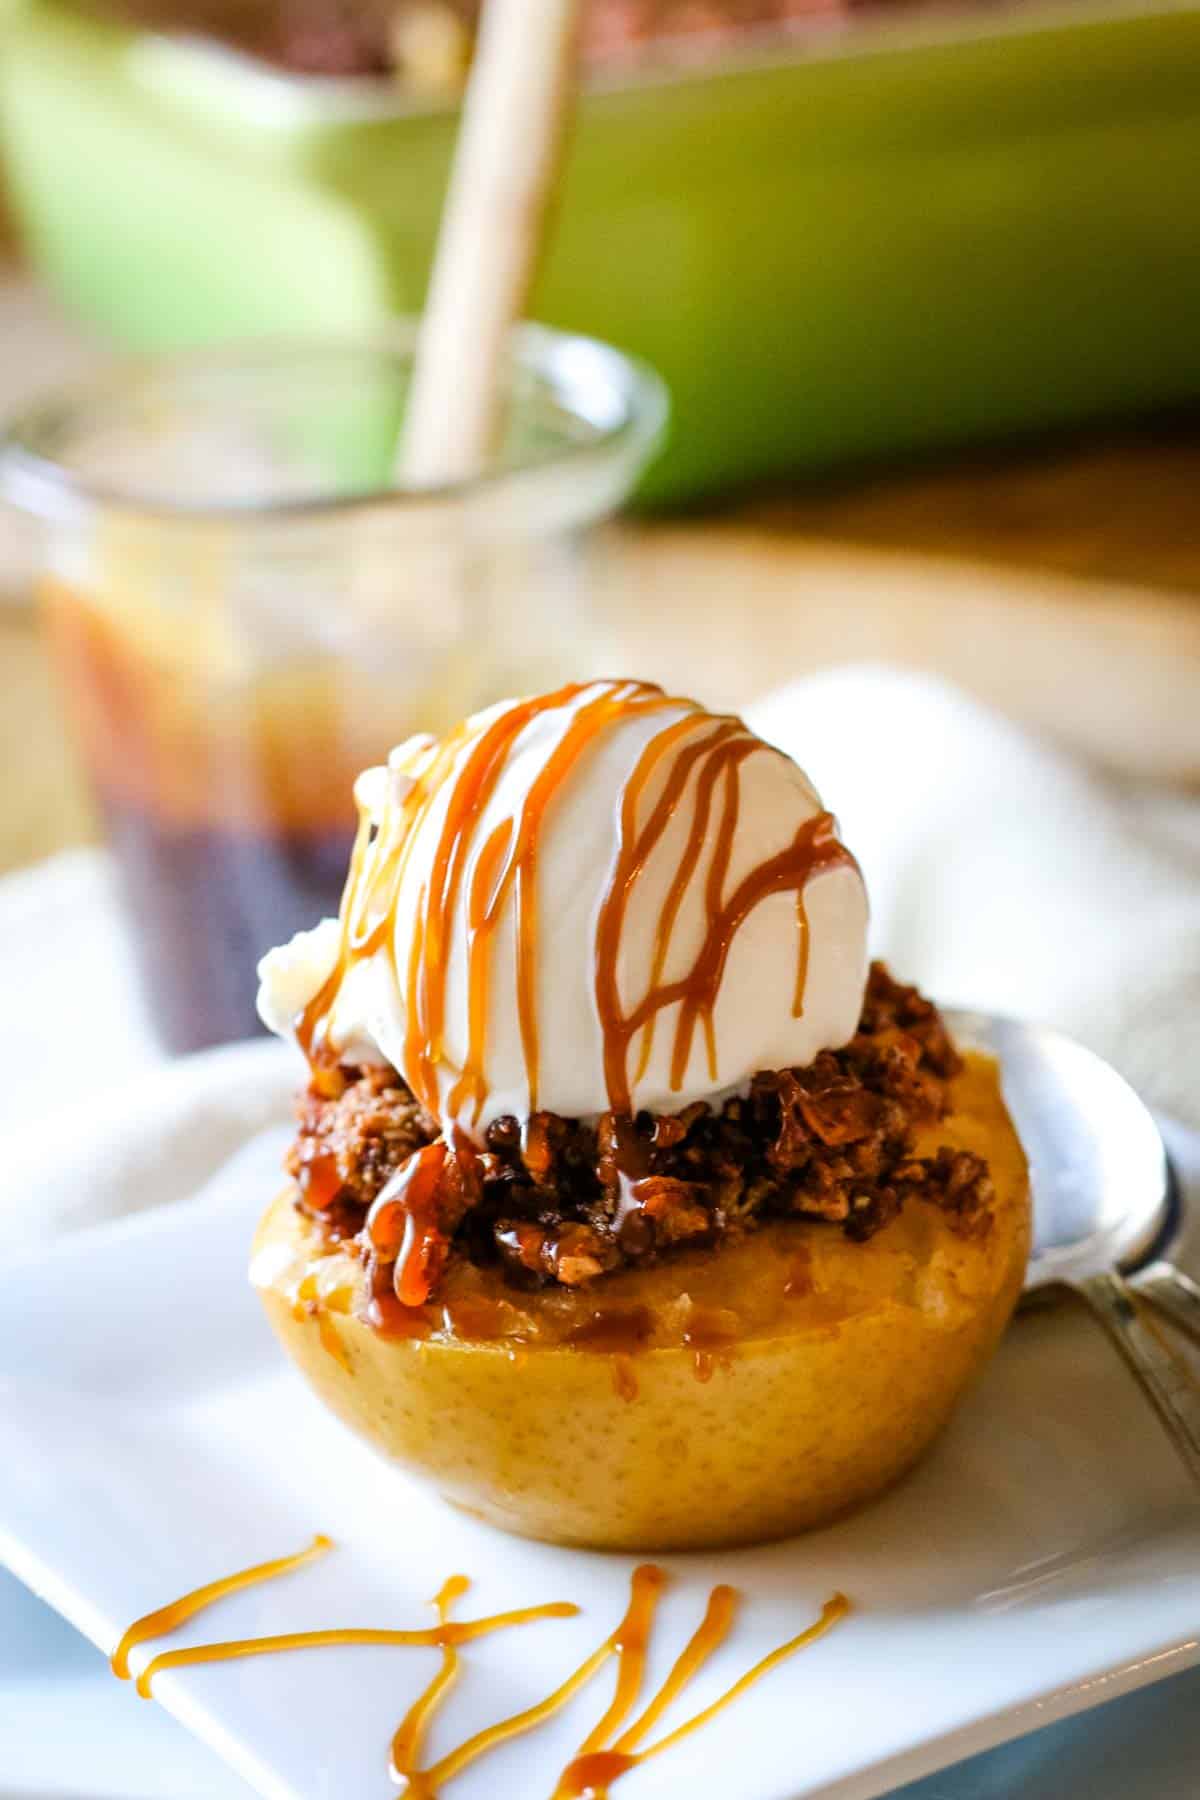 baked apple half with ice cream and salted caramel